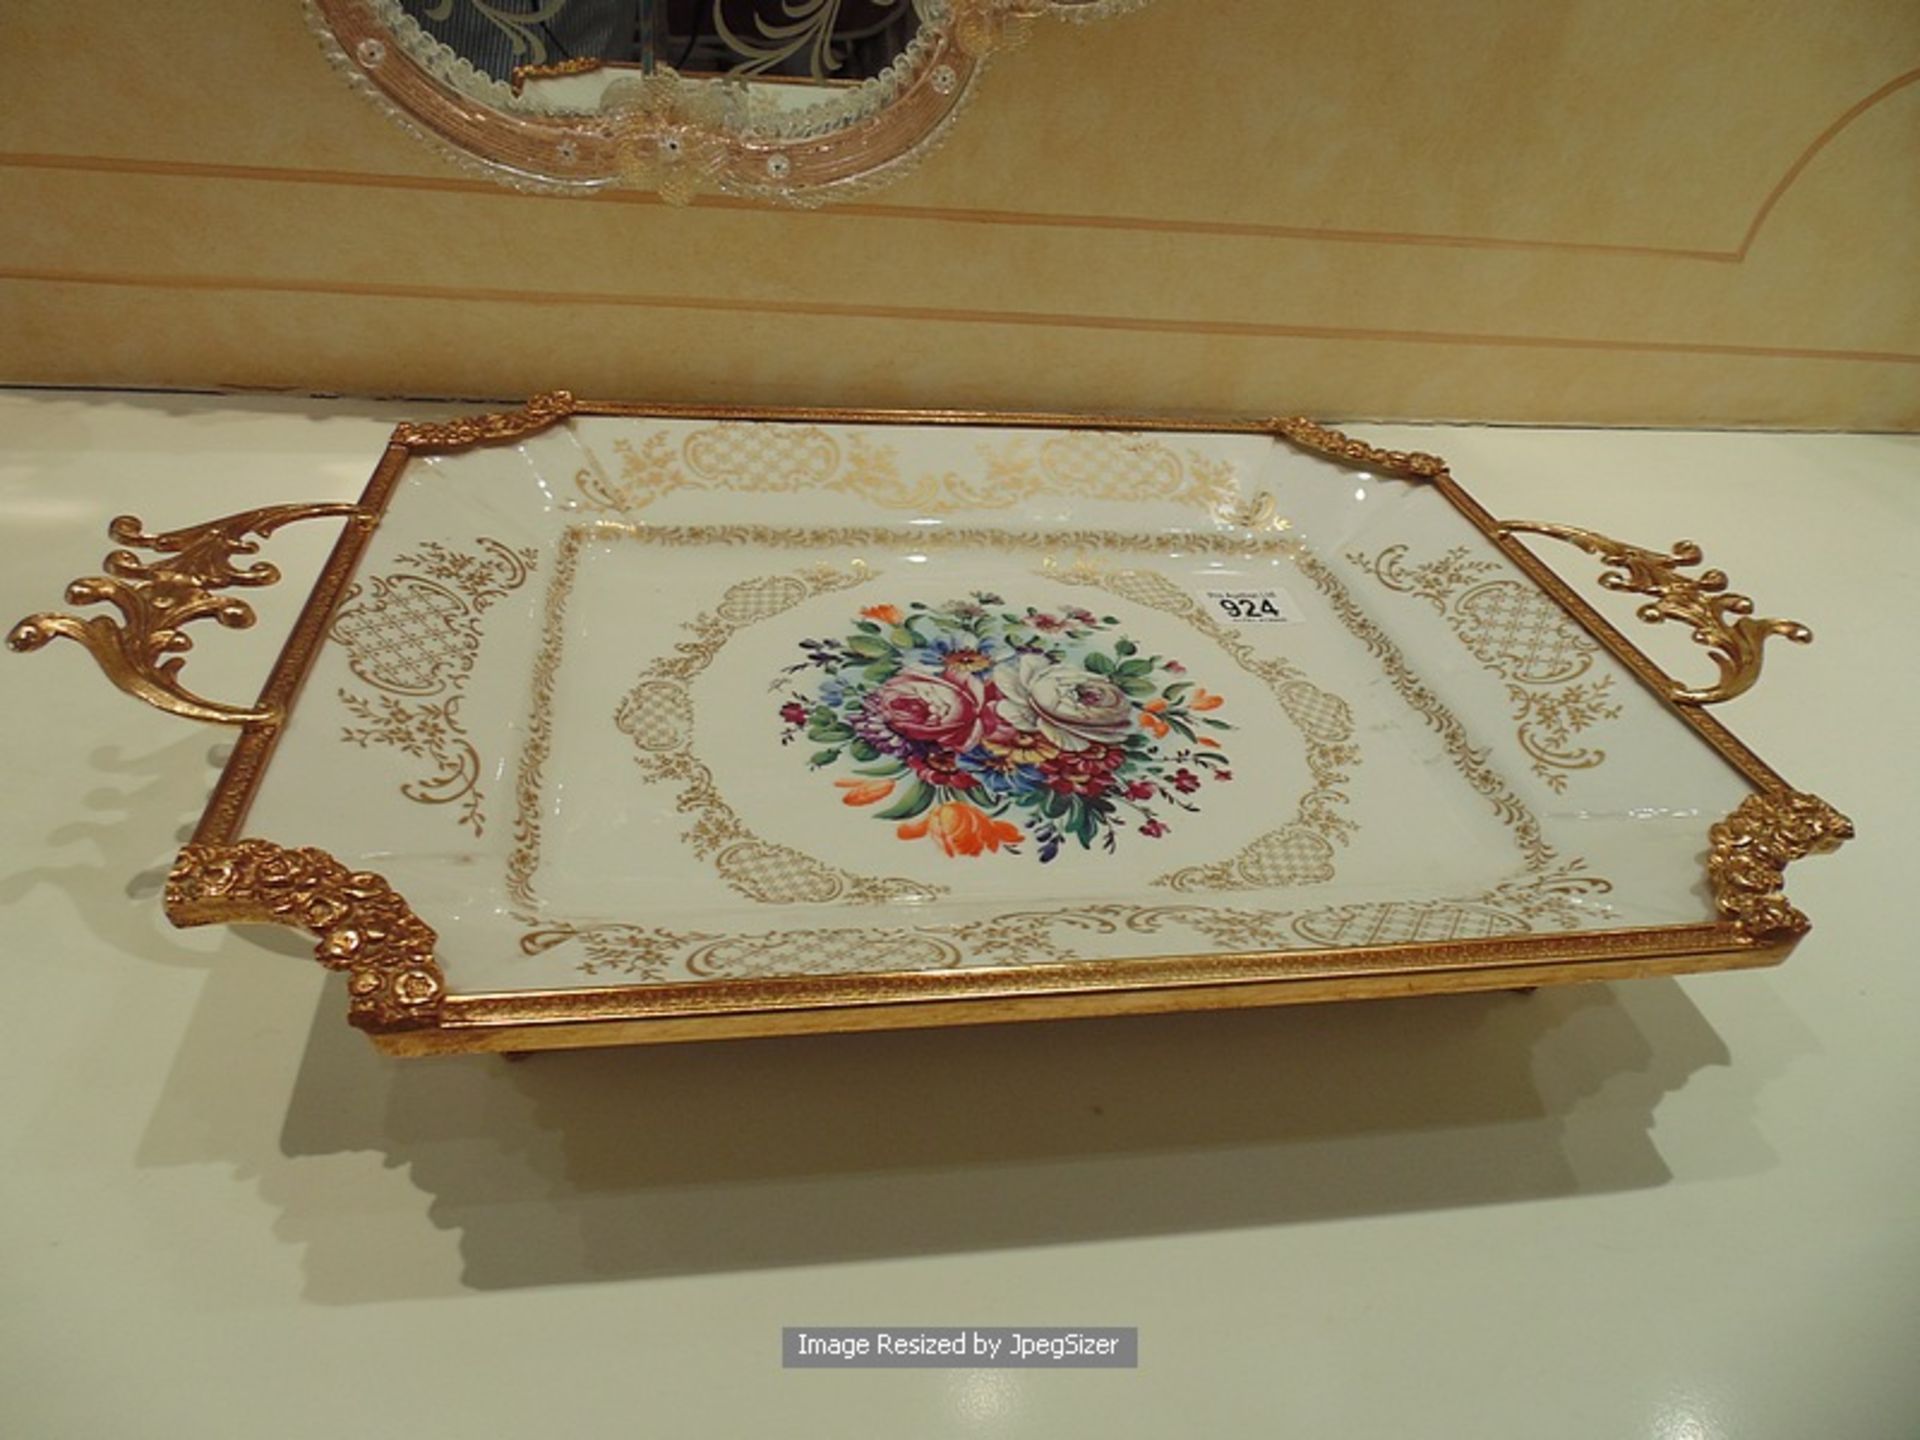 Limoges platter 520mm x 320mm x 80mm with a gold leaf carved pattern edge